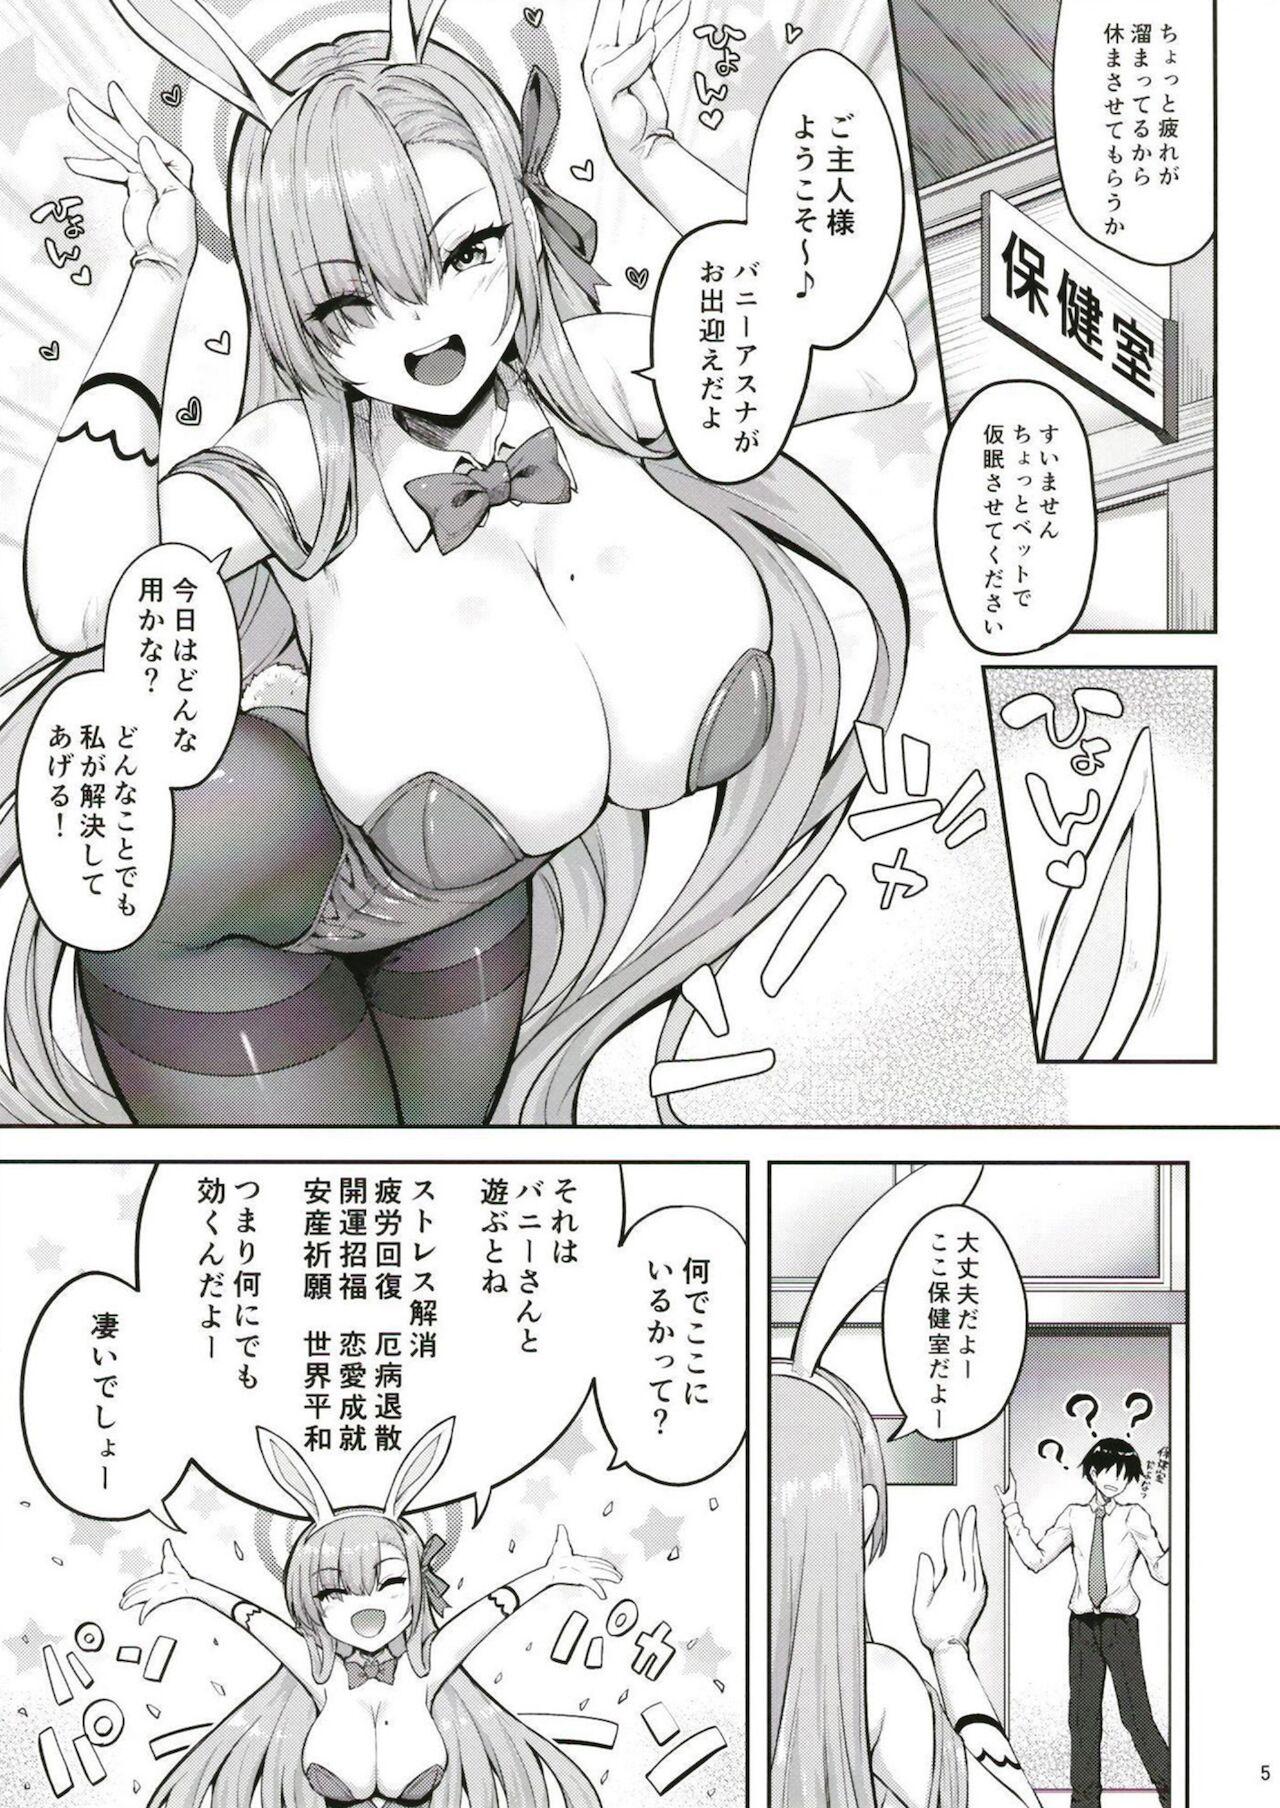 From Goshujin-sama to Issho 2 - Blue archive Pussylicking - Page 3